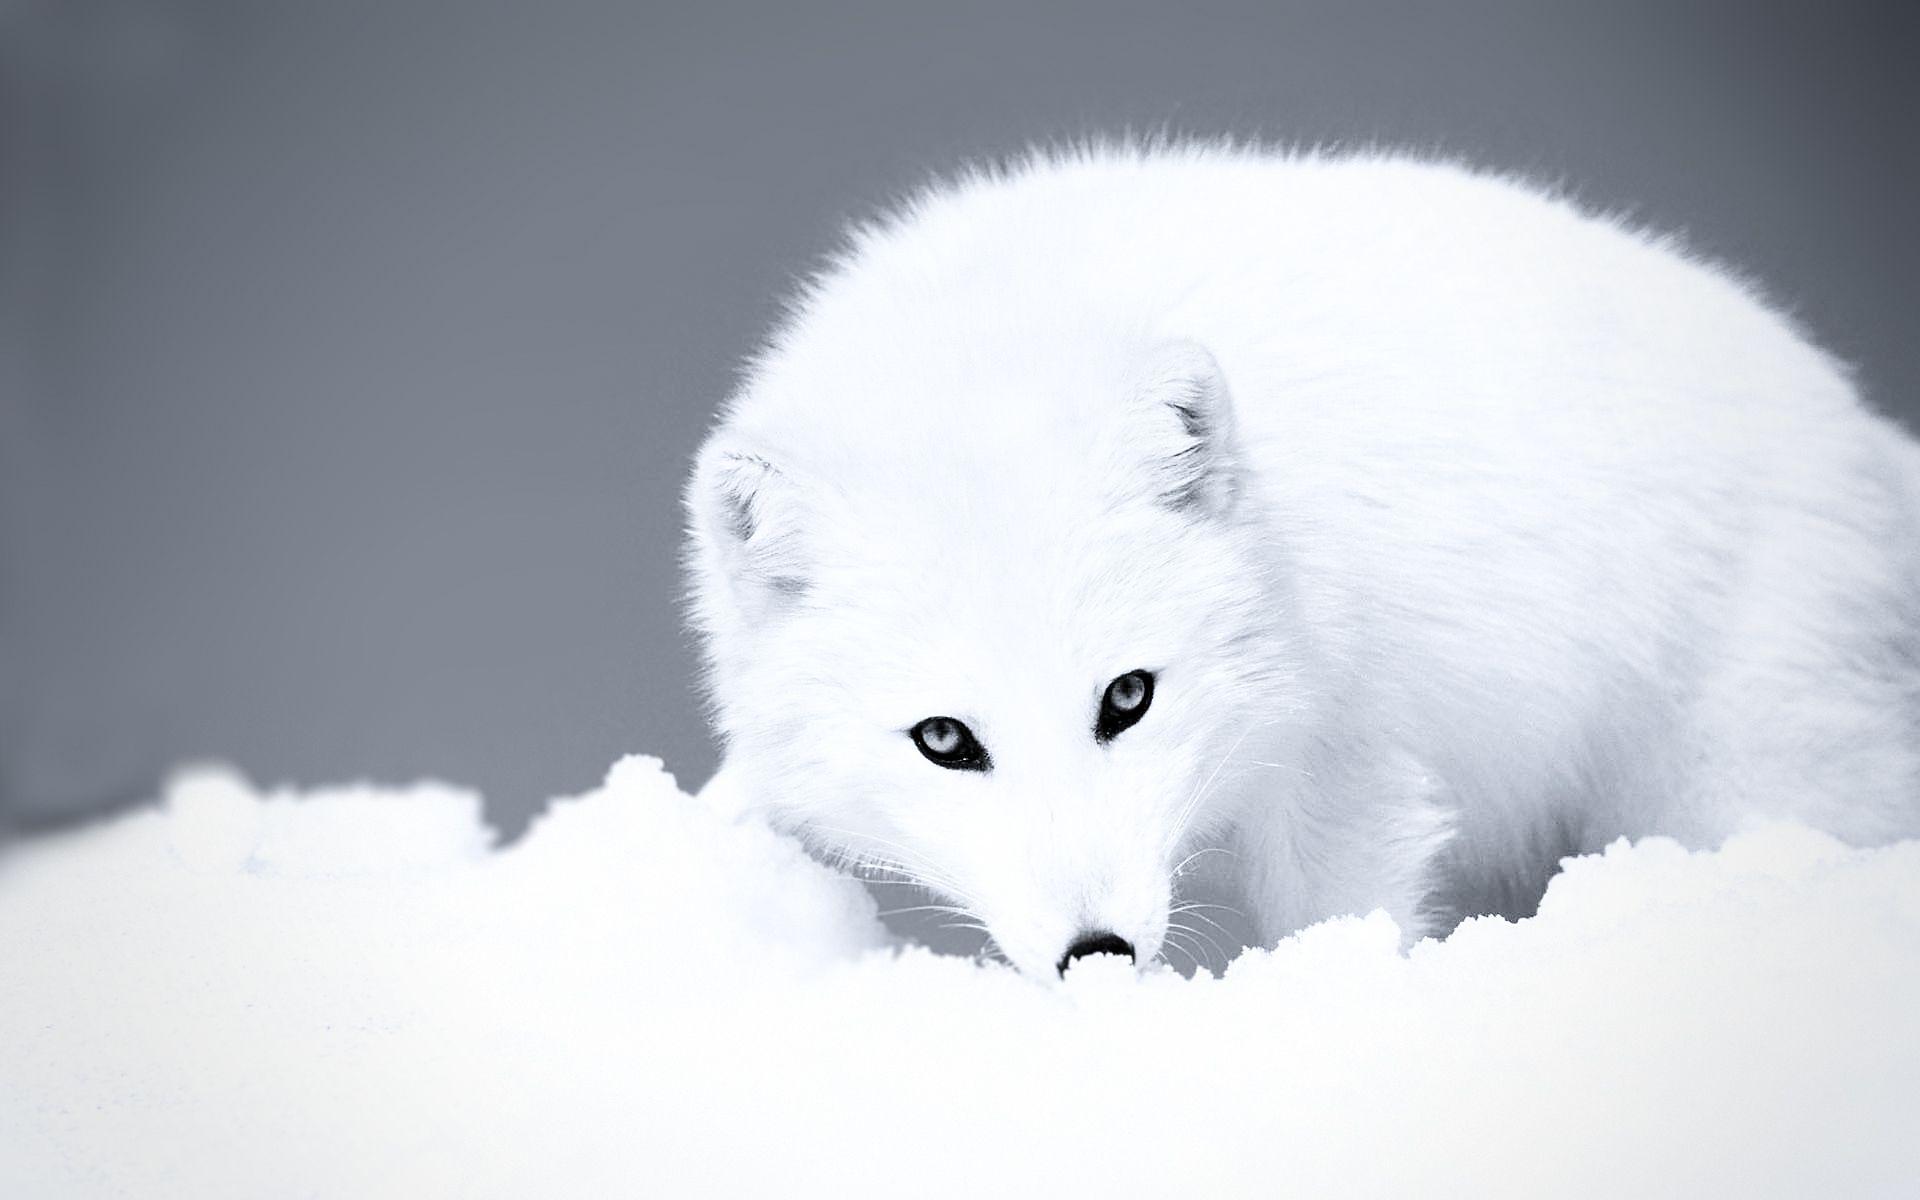 Wallpaper.wiki Cute Arctic Fox Background 1 PIC WPC003221